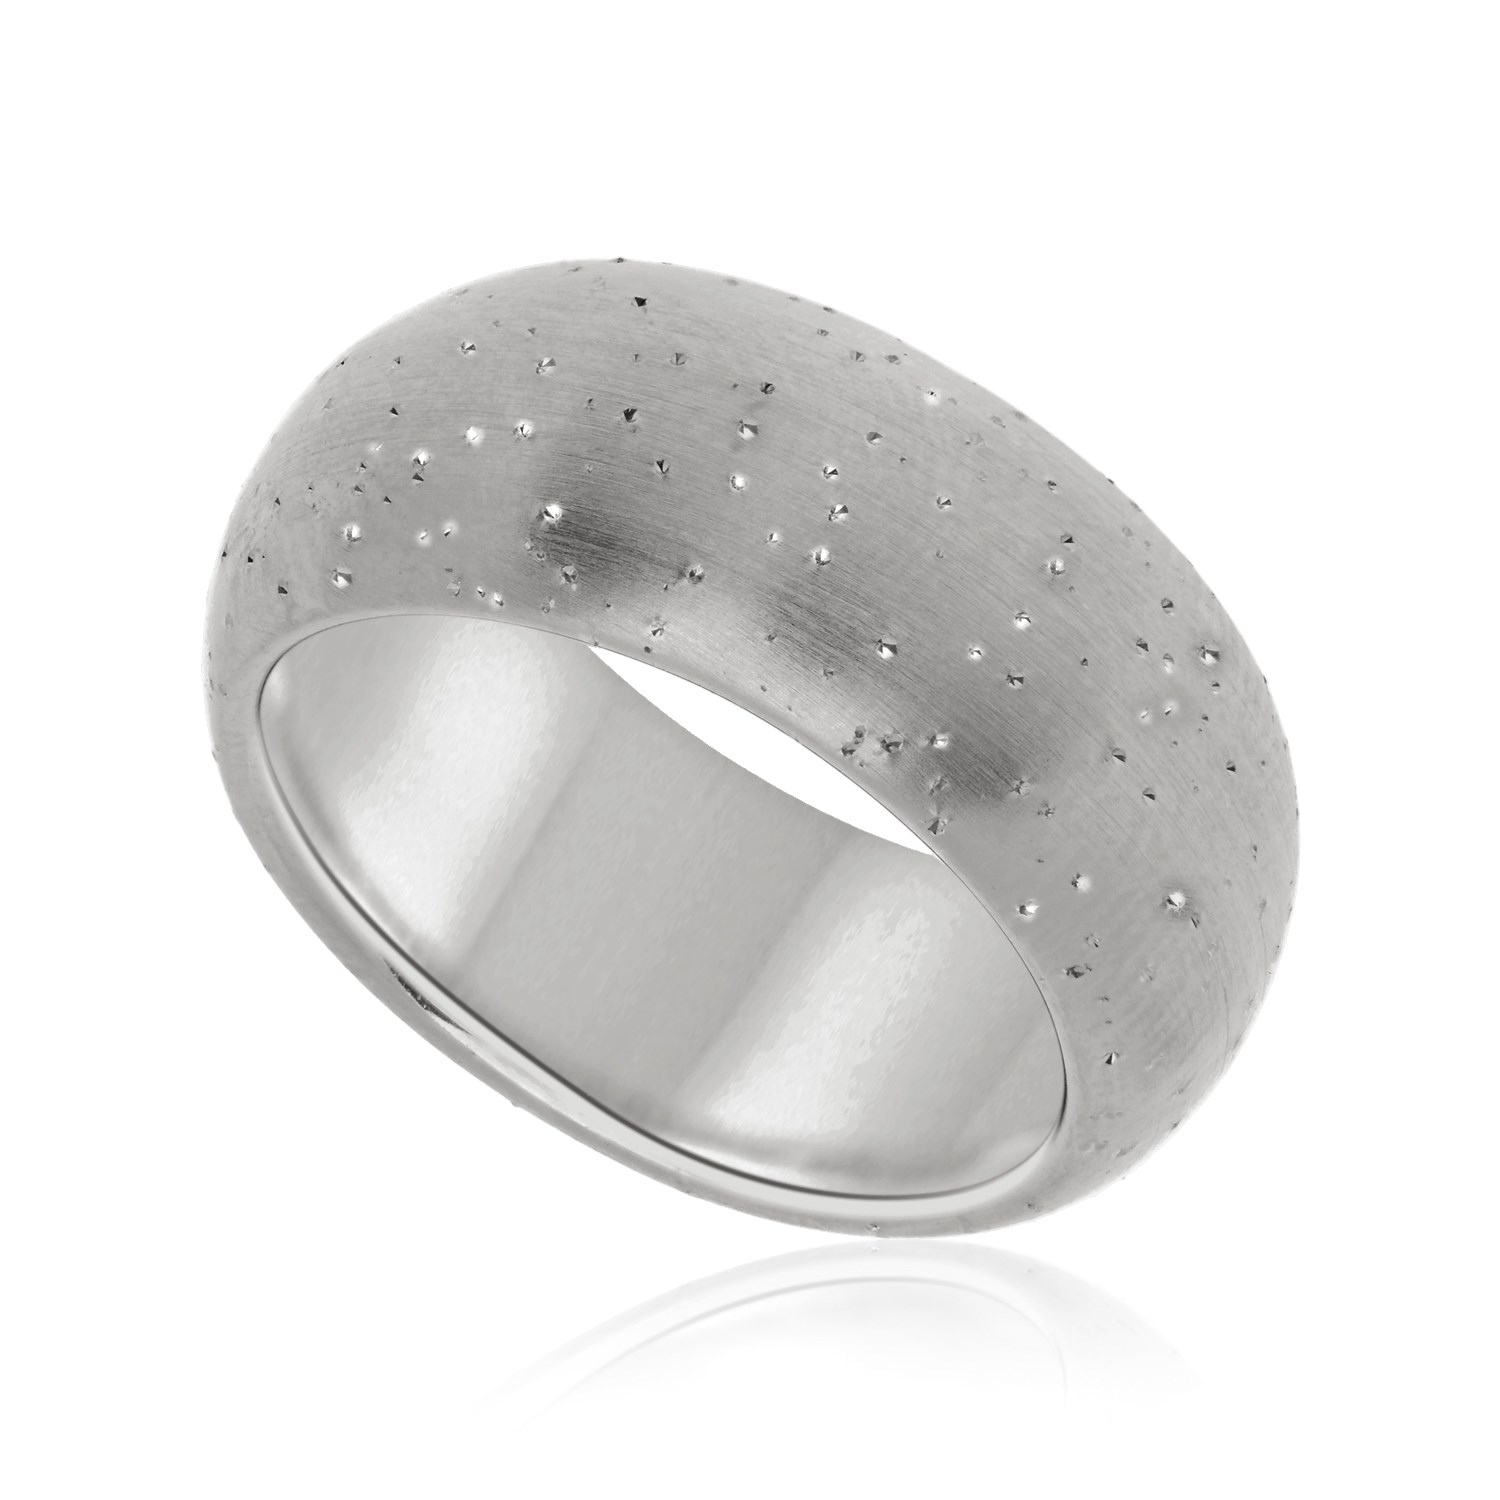 Diamond Dust Dome Style Ring in Sterling Silver - Richard Cannon Jewelry